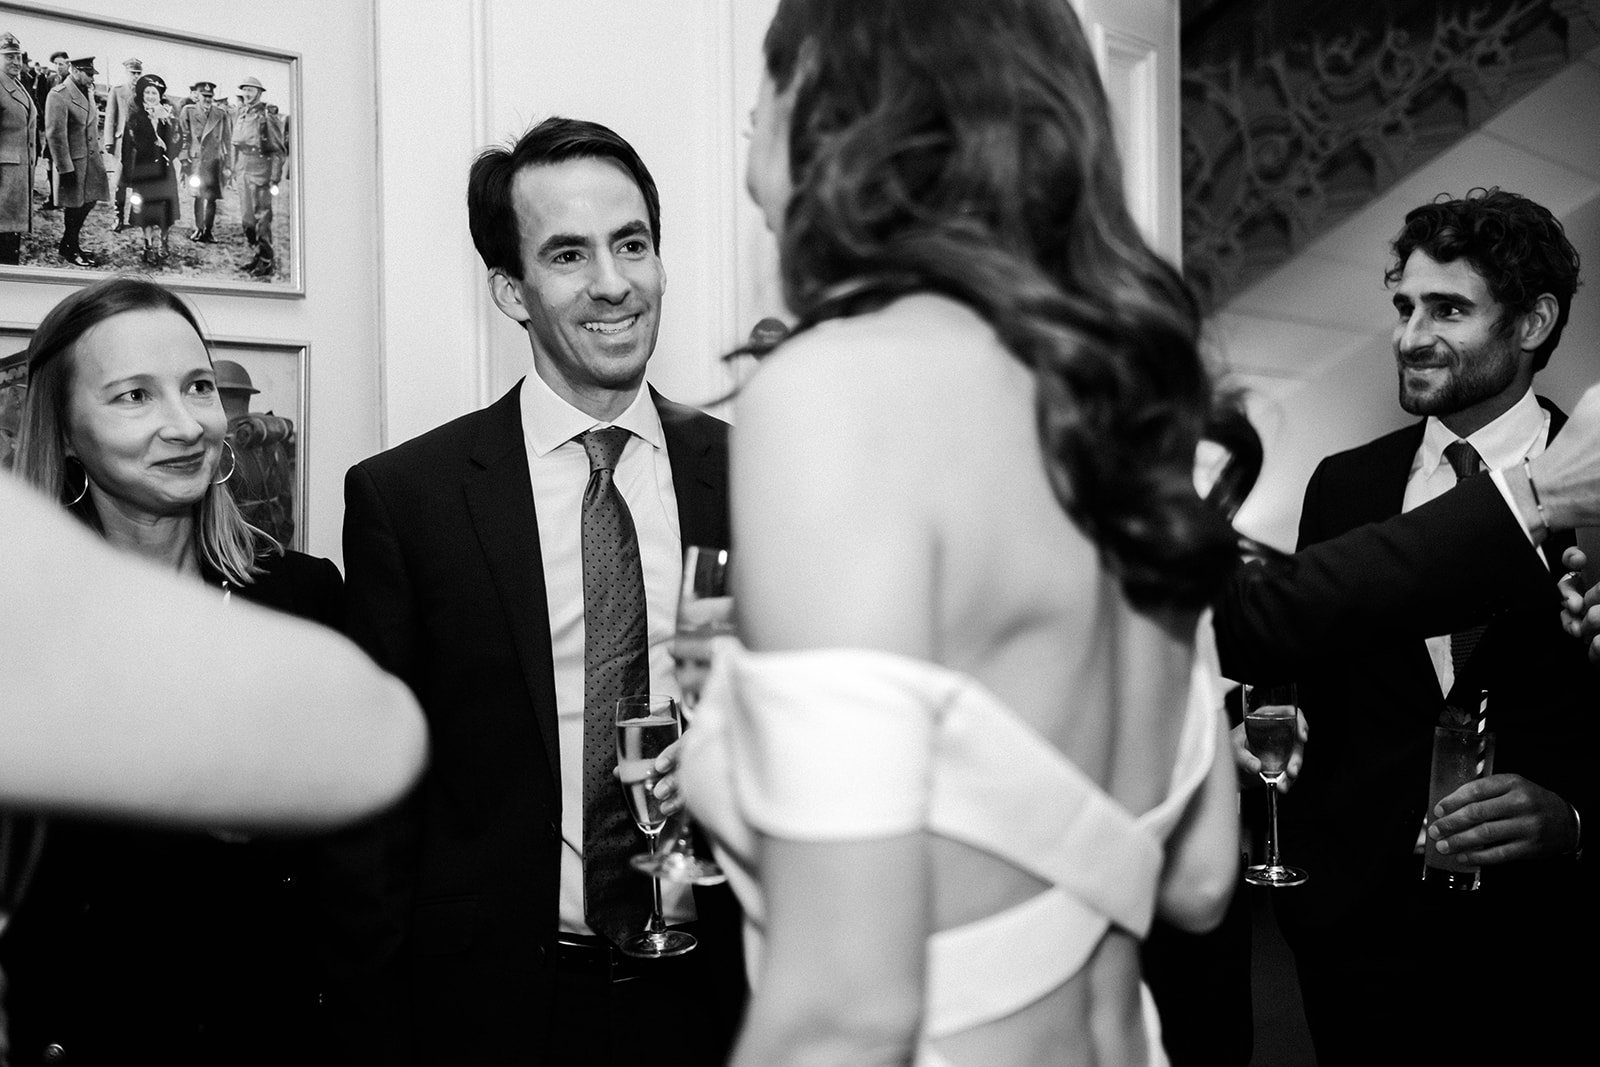  Wedding photographer has captured the bride engaging in conversation at the wedding reception with her wedding guests in this black and white image. You can see the back of the bride and her beautiful low cut, crossover back, sleek wedding dress.  